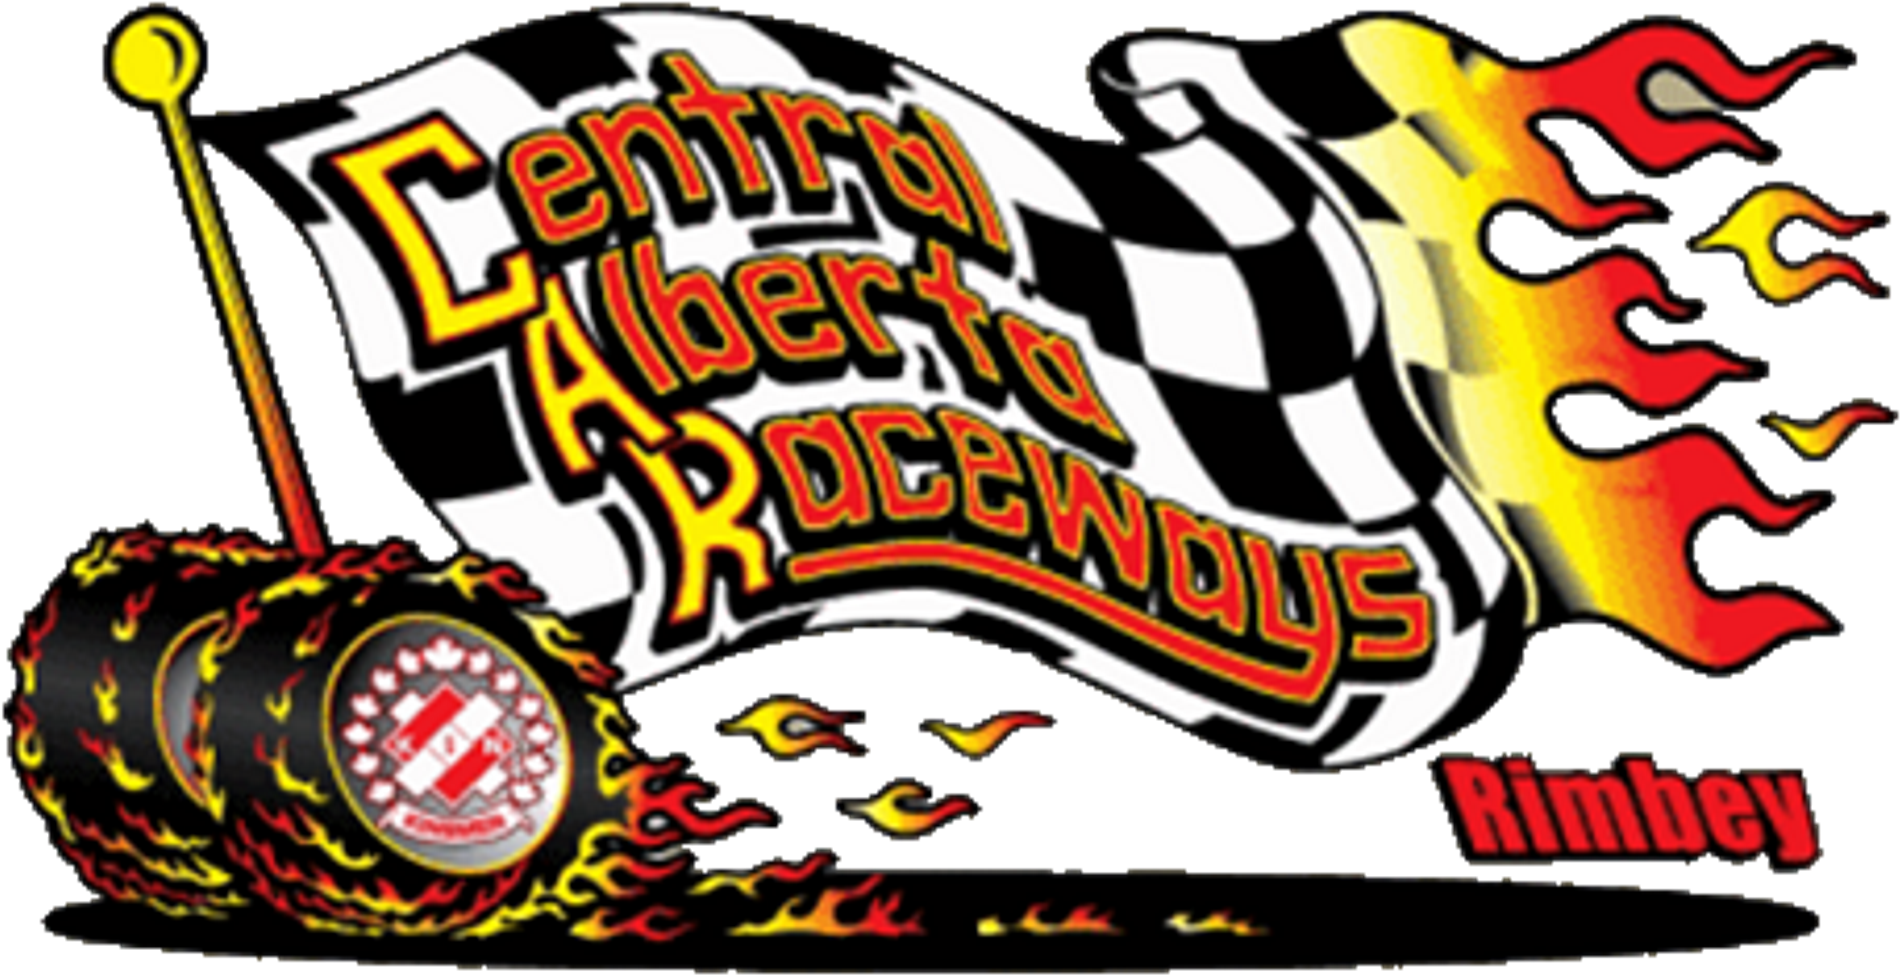 Check Out Their Website For The Latest Schedule And - Central Alberta Raceways (1928x1008)